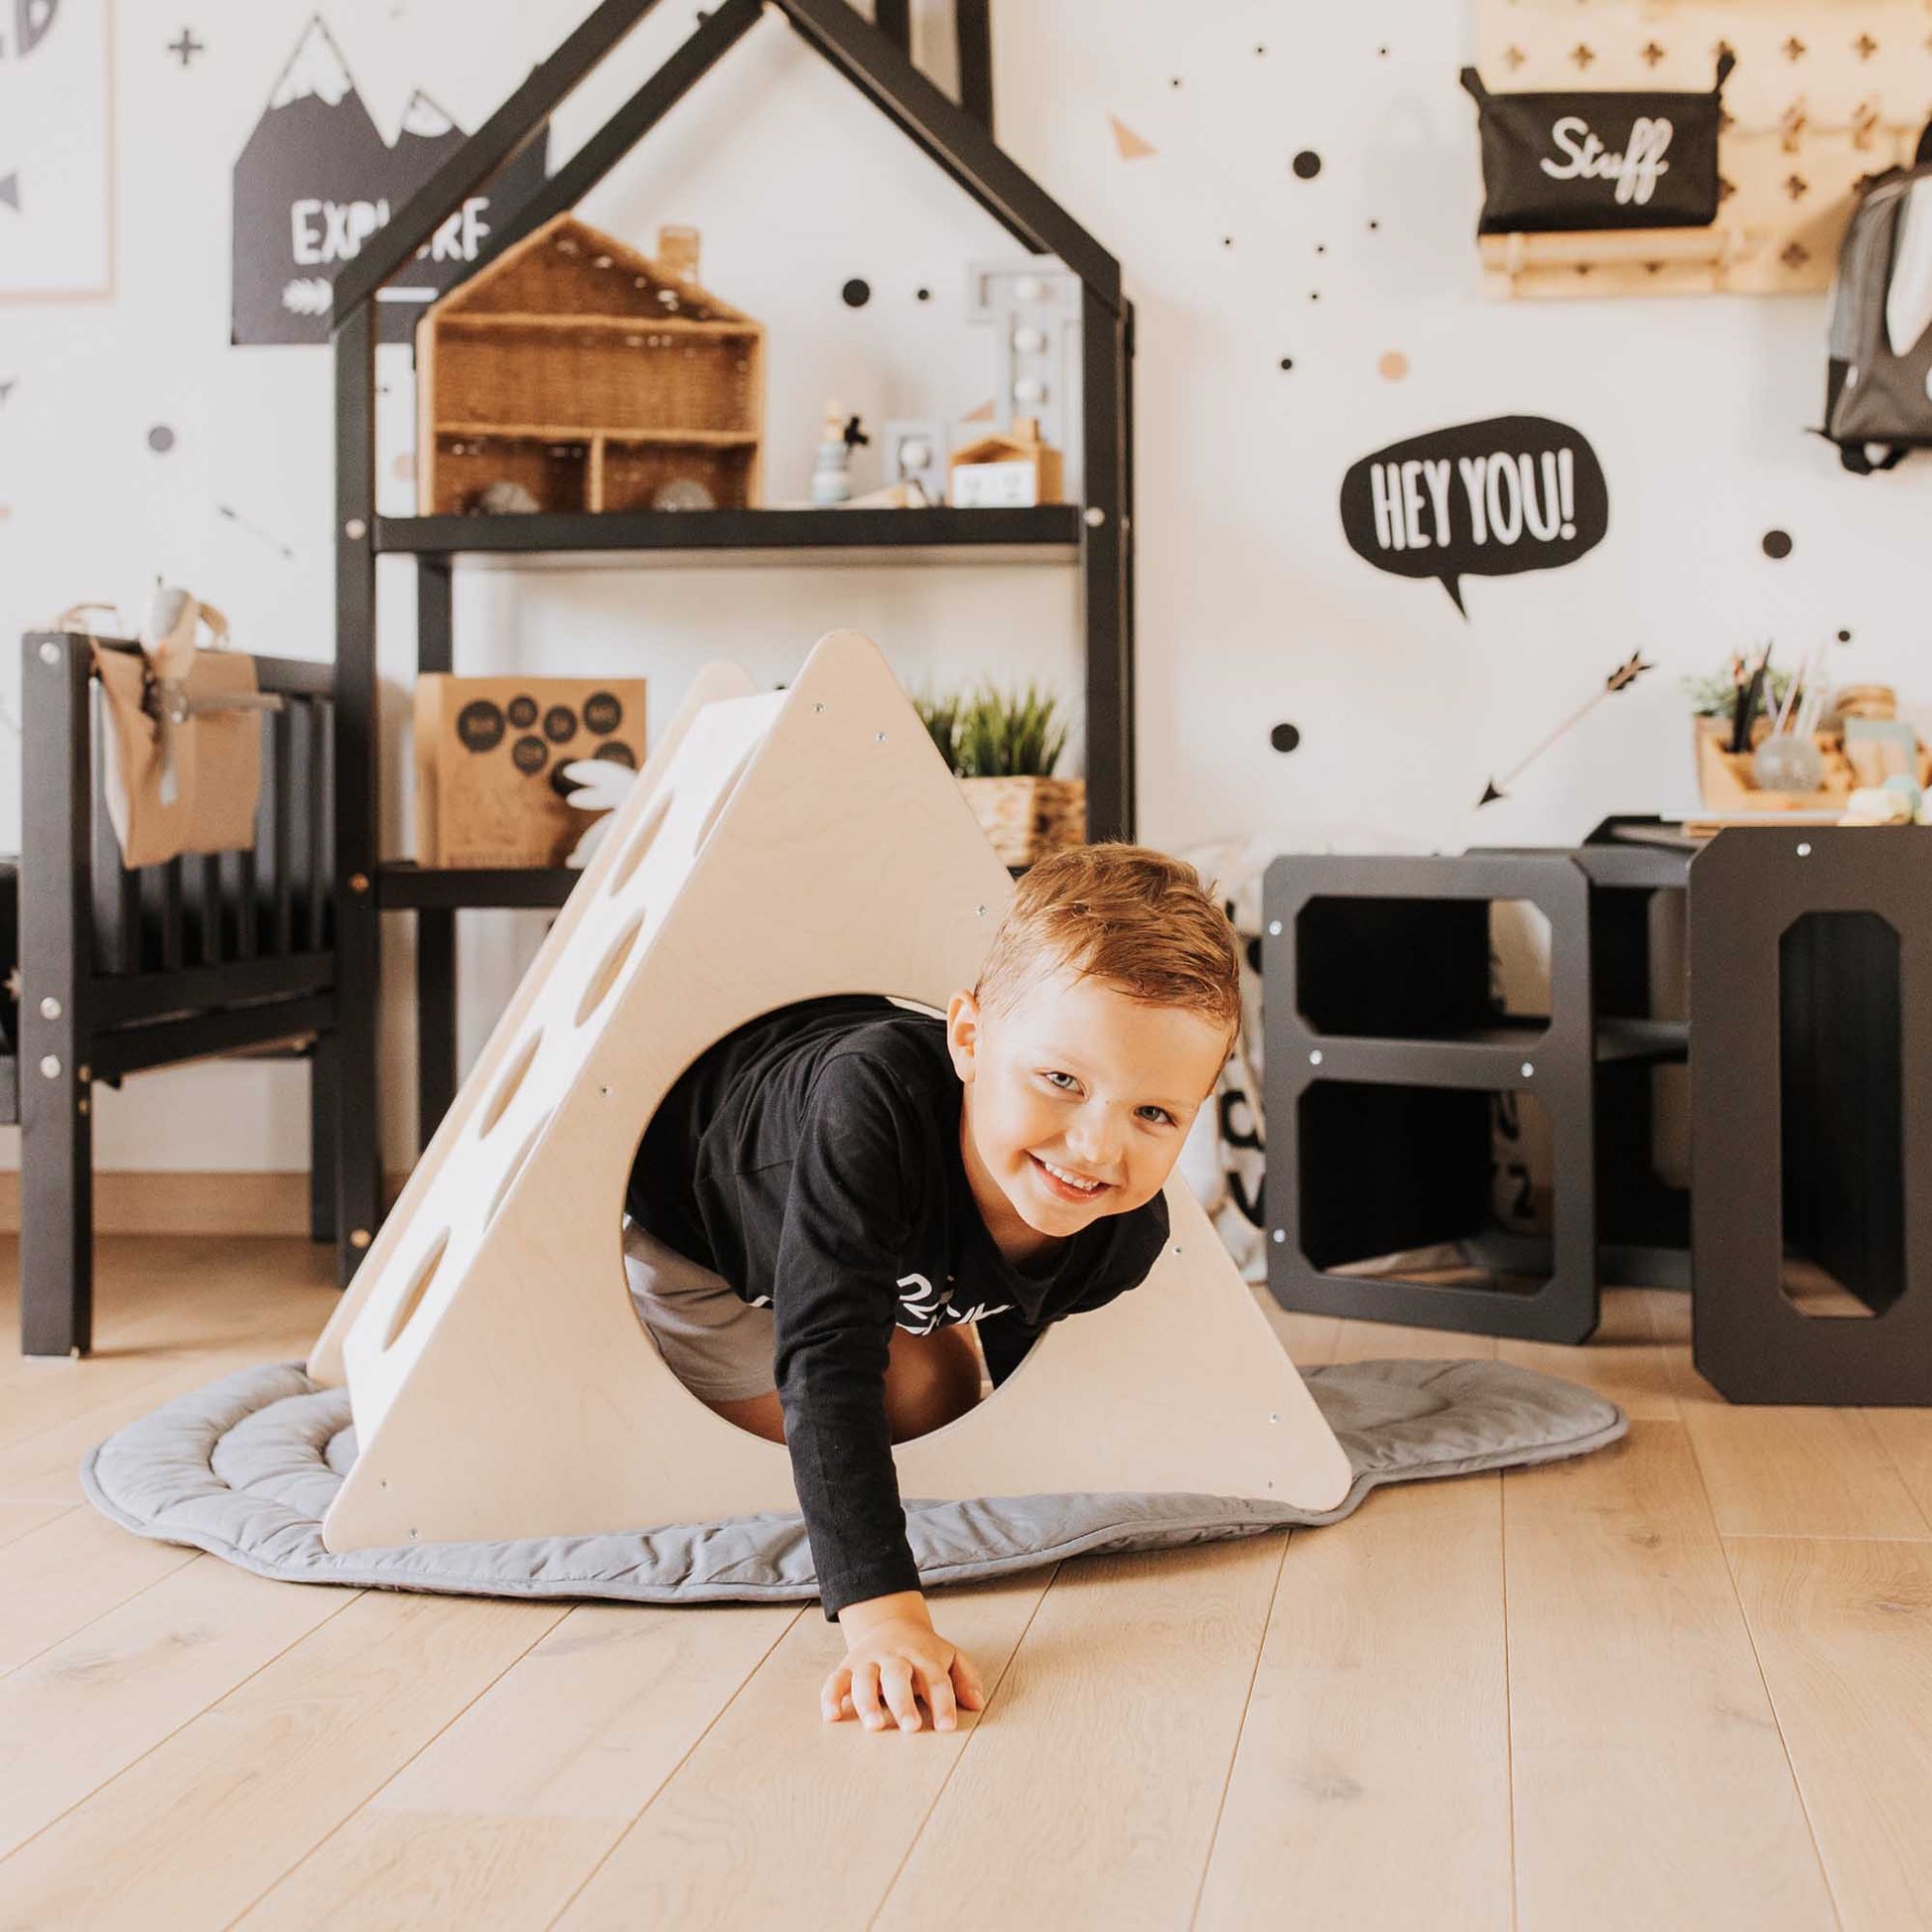 A little boy enthusiastically playing with a Climbing triangle + Transformable climbing gym + a ramp in his room.